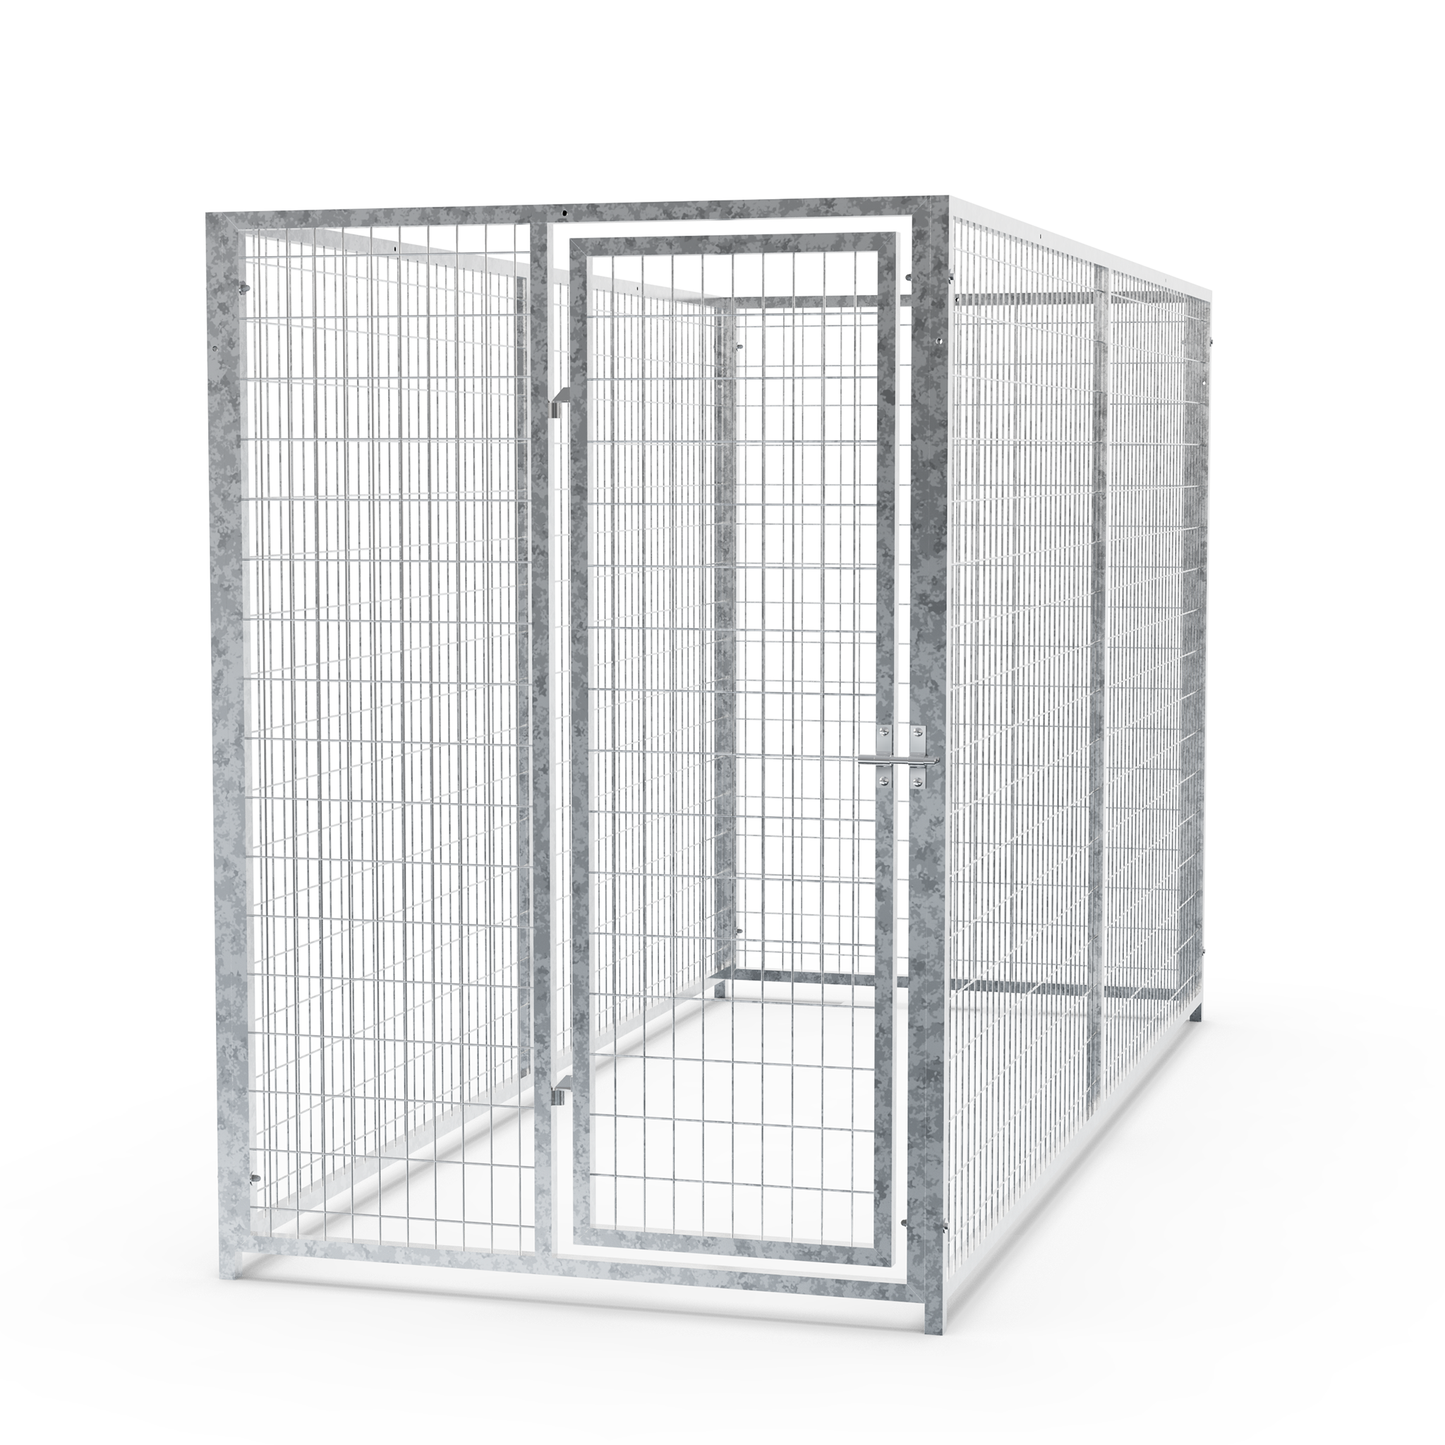 RRANK Co. 4'x10' Kennel